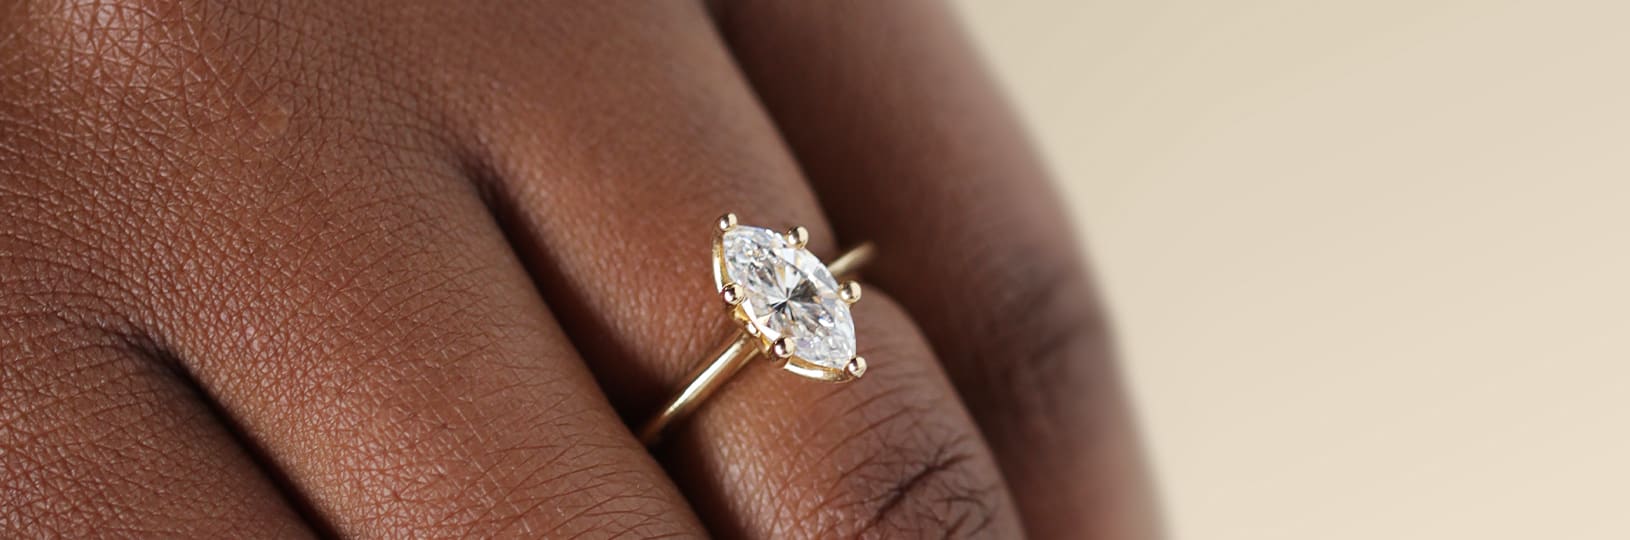 A marquise cut stone in a solitaire setting